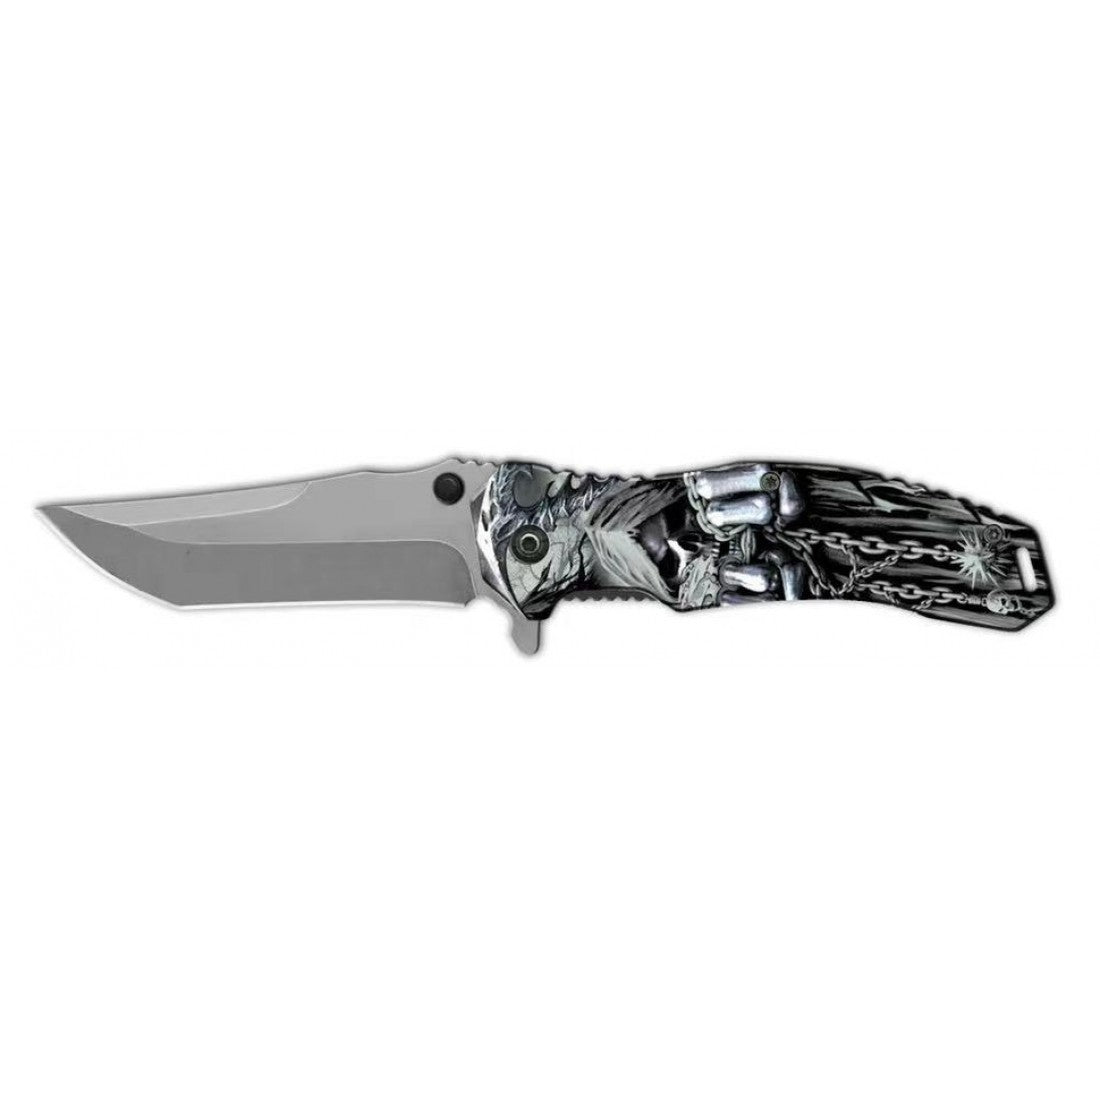 RT-7357 Fantasy Action Assist Knife ABS HANDLE (120/12/12*9*16/37) - MK Distro